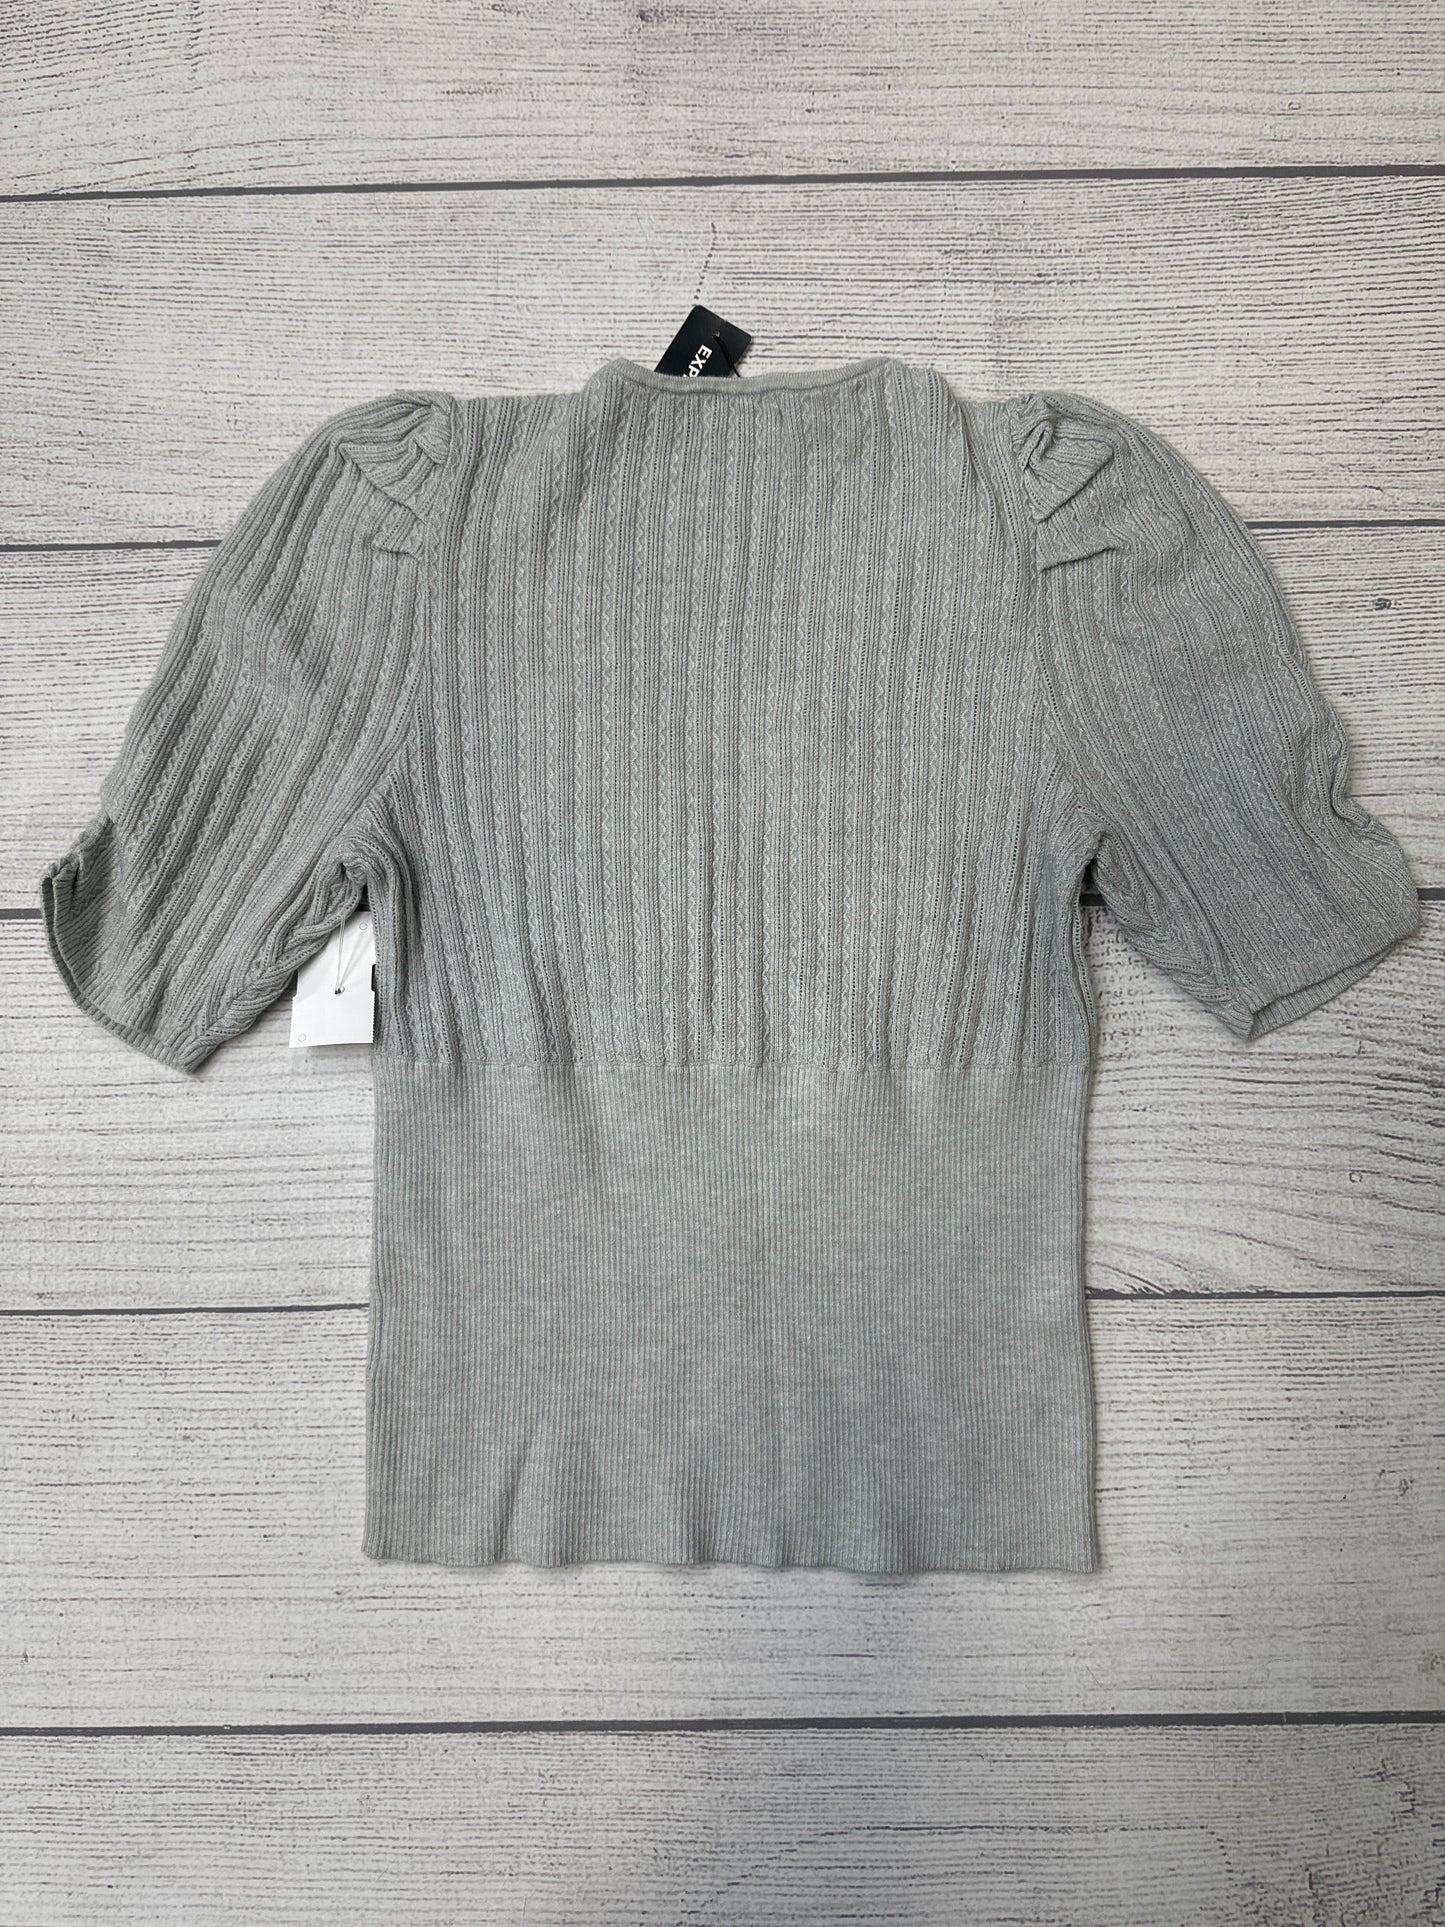 New! Grey Top Short Sleeve Express, Size S